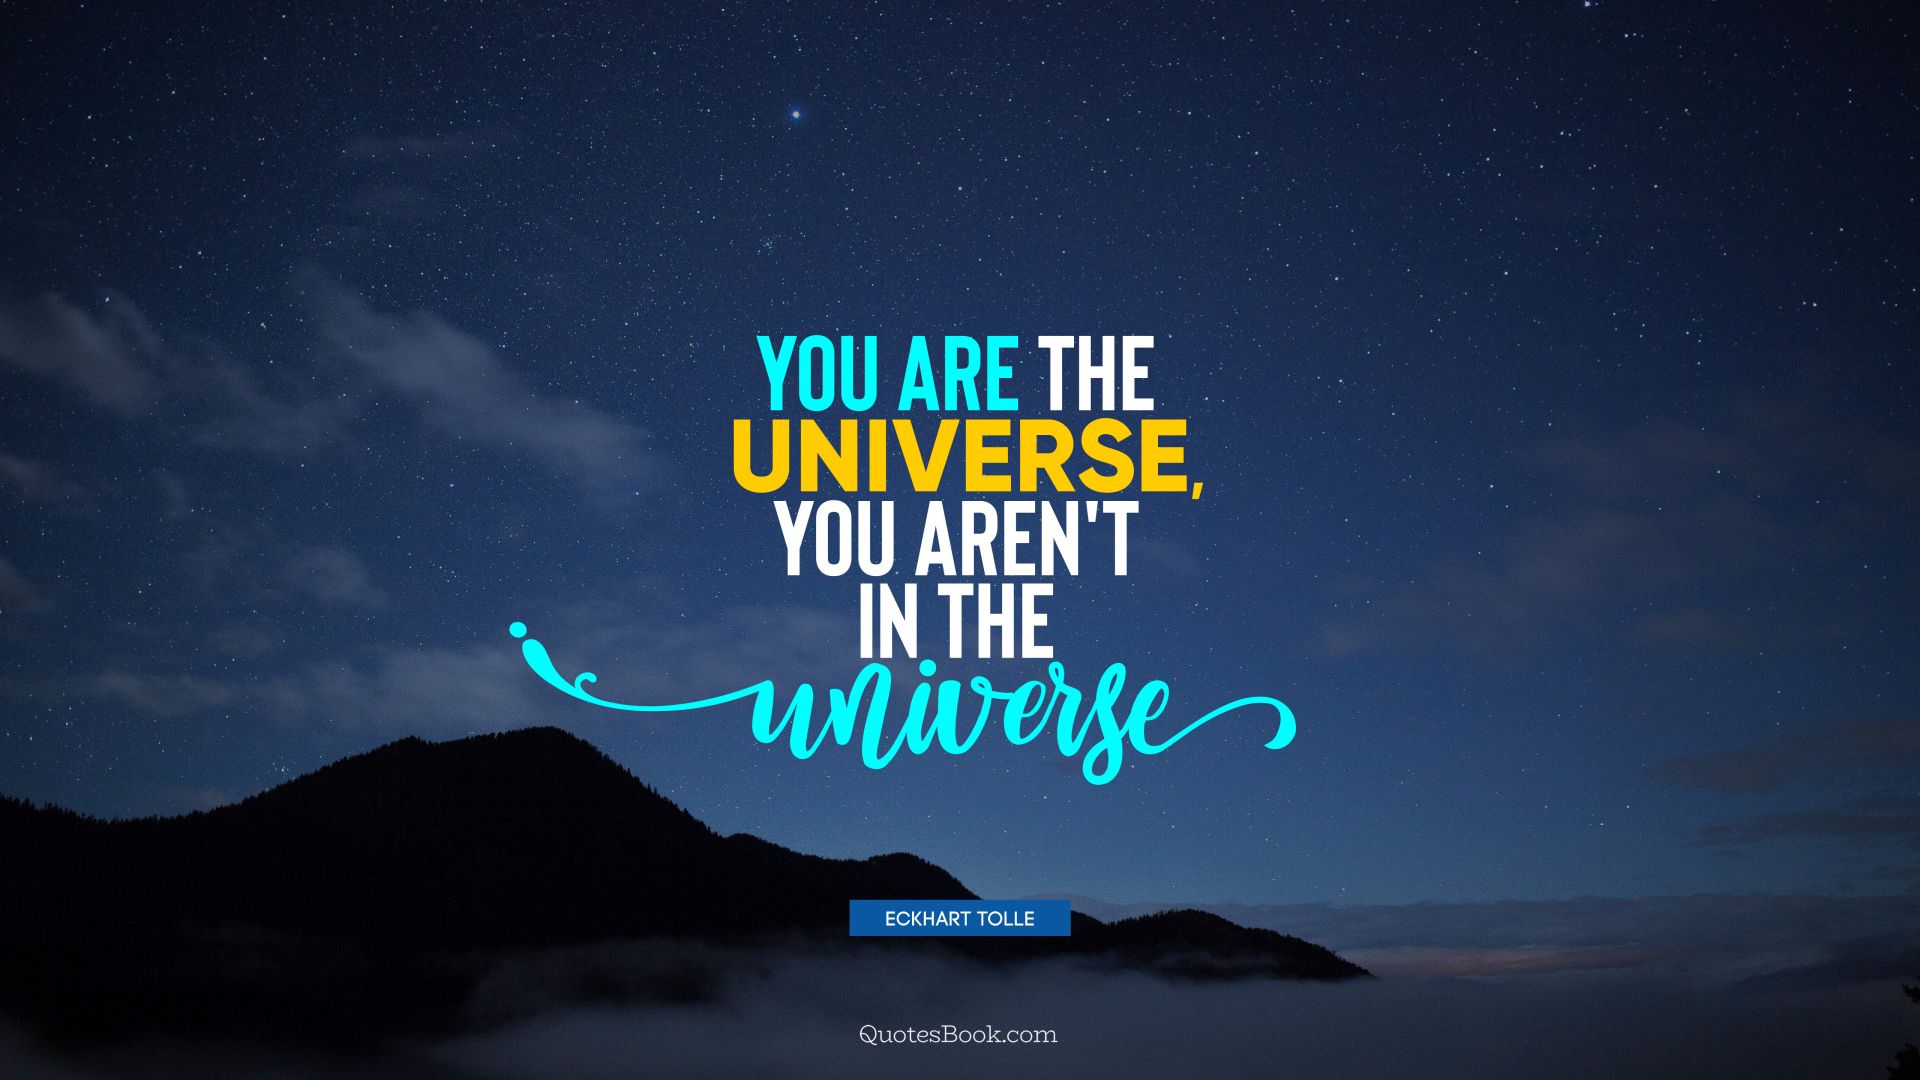 You are the universe, you aren't in the universe. - Quote by Eckhart Tolle